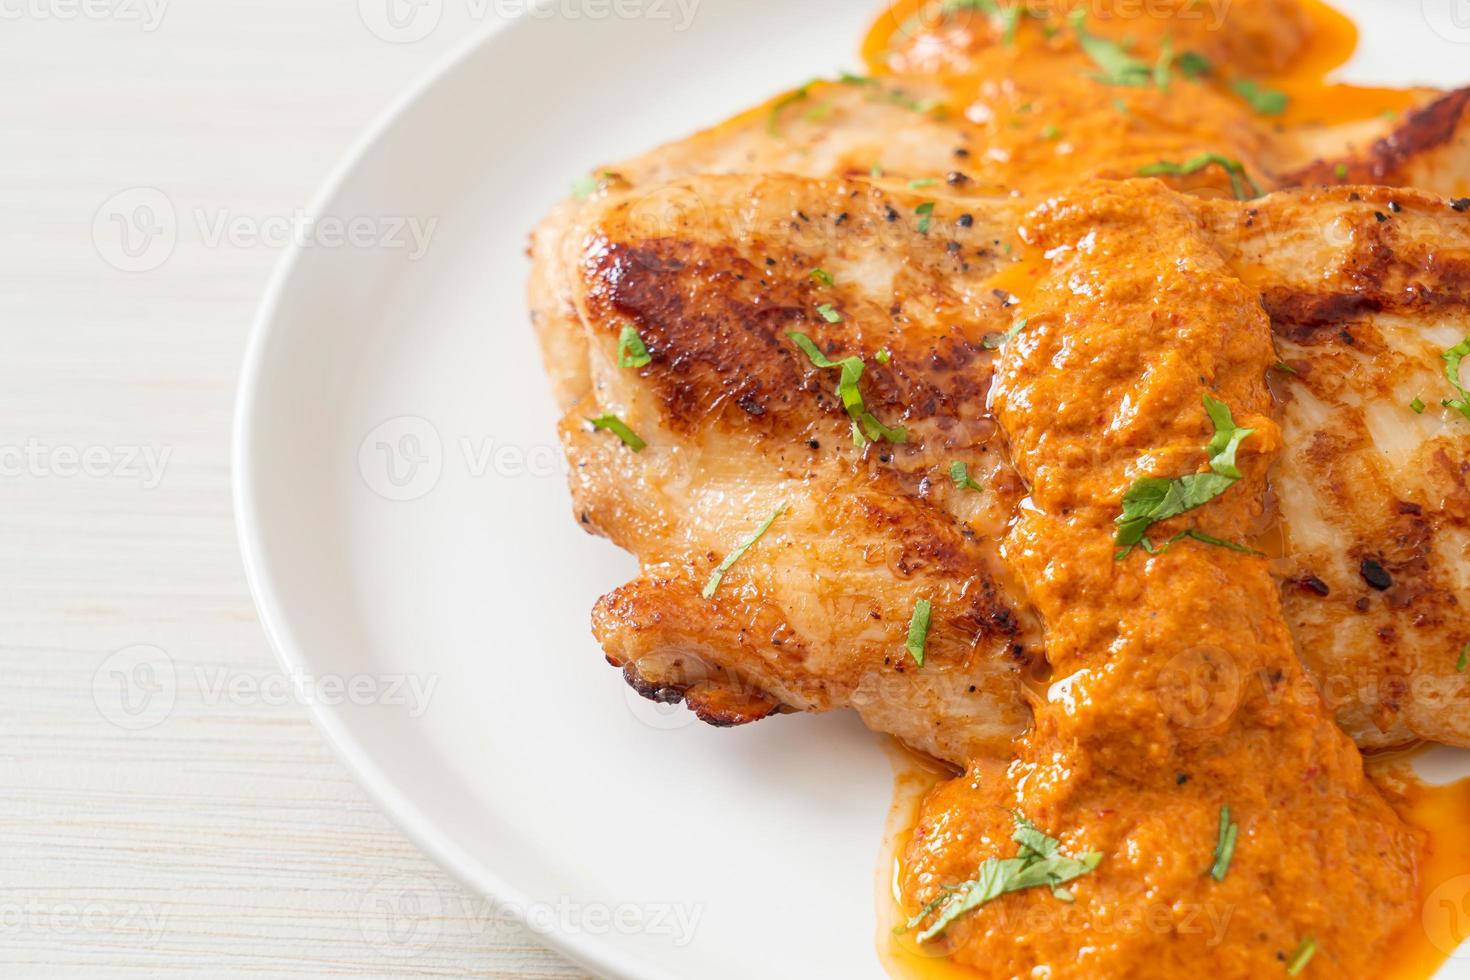 Grilled chicken steak with red curry sauce - Muslim food style photo